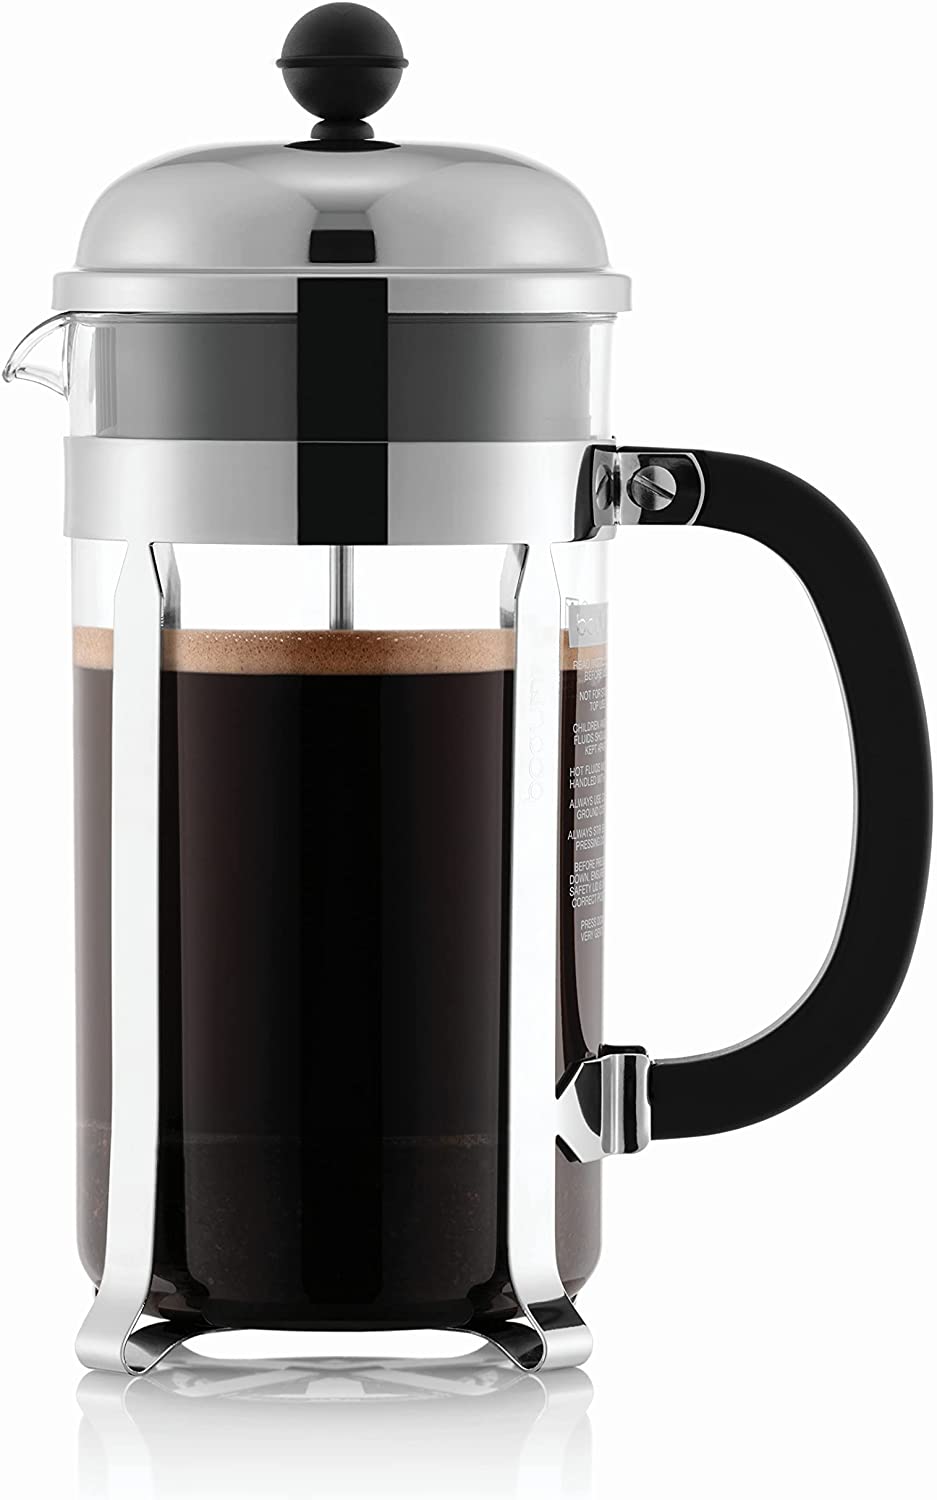 Bodum 1928-16 Chambord Coffee Maker - Stainless Steel - 8 Cup /1.0 L